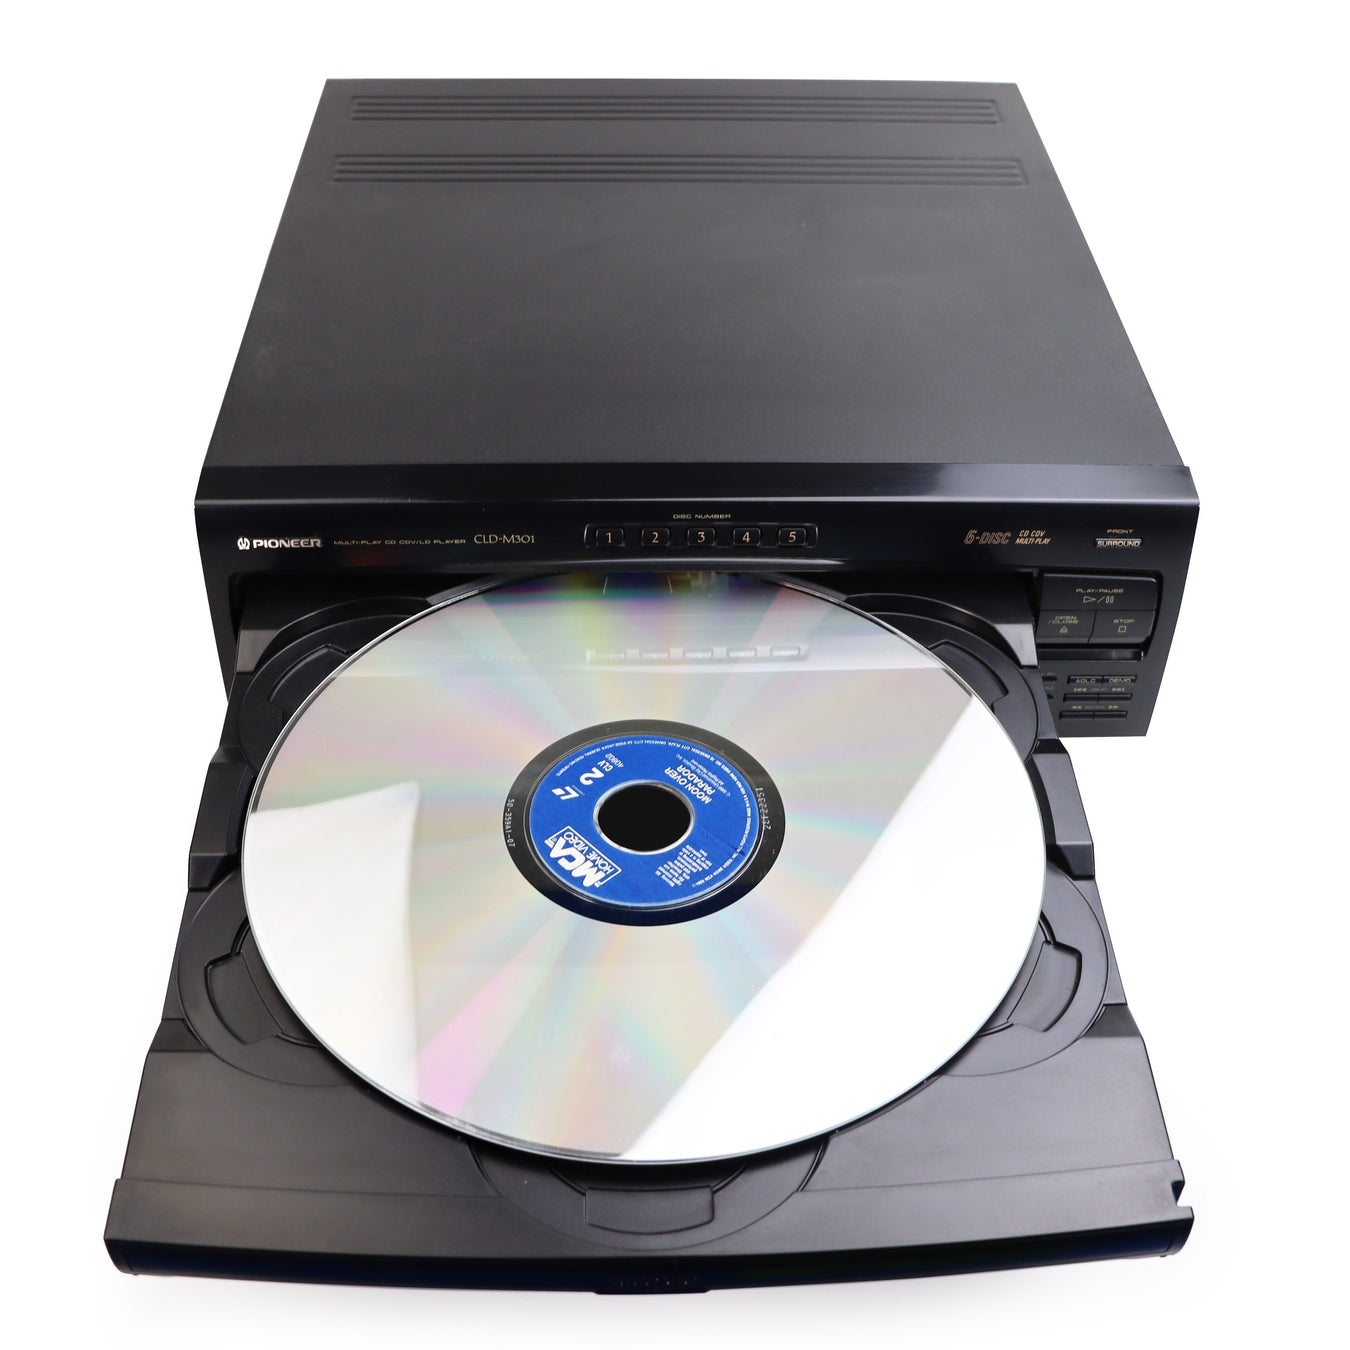 Laserdisc players player machines video disc large big pioneer karaoke s-video composite optical digital audio movies cd dvd audio top loading loader front loader sony toshiba laser disc system both side play a and b